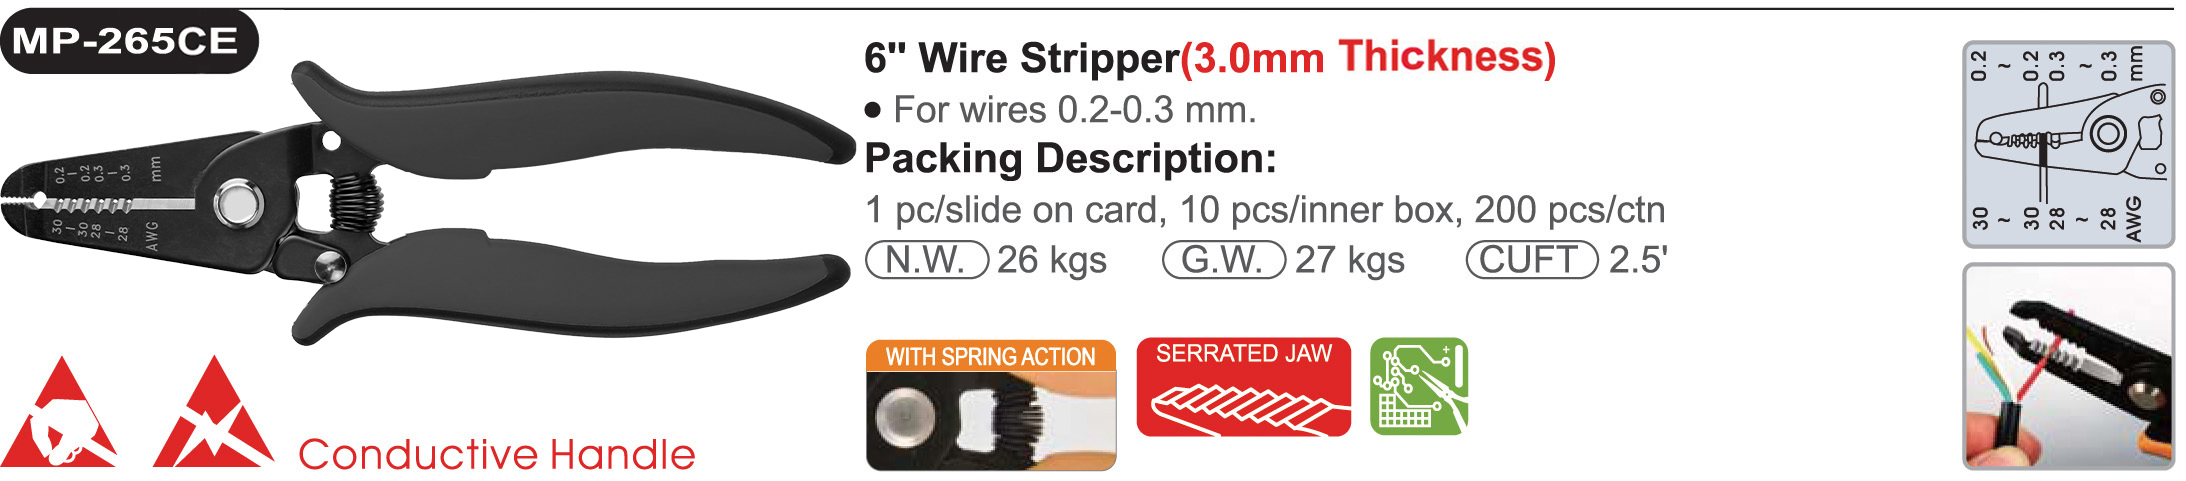 proimages/product/pliers/wire_strippers/ELECTRONICS_WIRE_STRIPPER_ESD/MP-265CE/MP-265CE.jpg